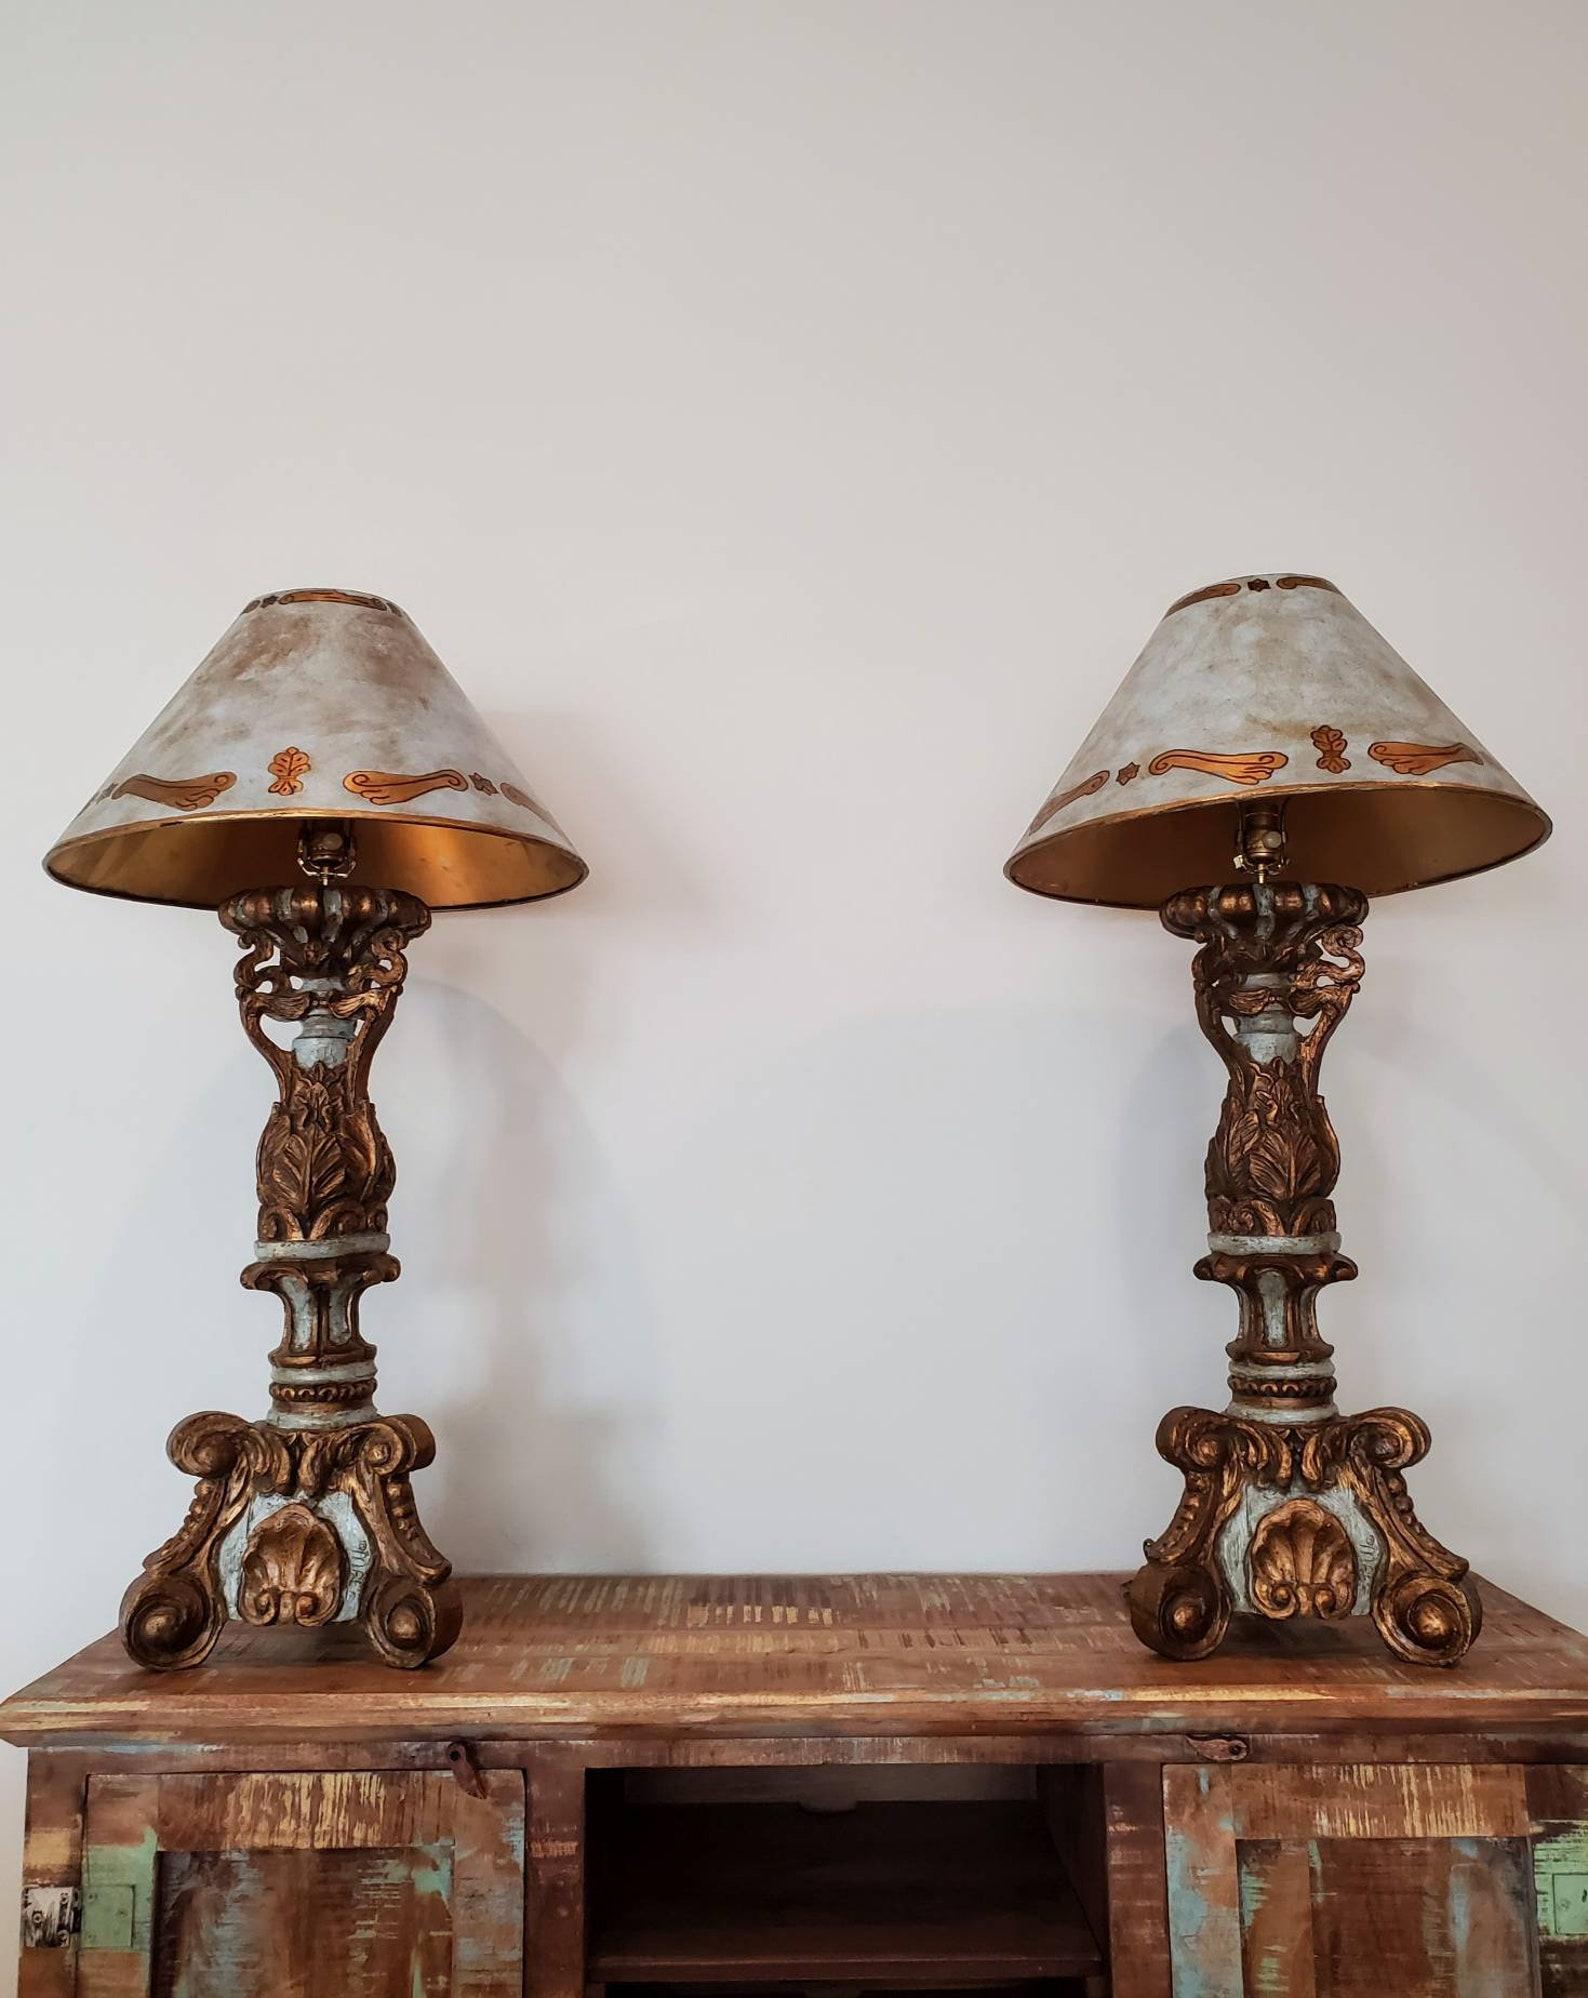 A large and magnificent pair of altar candlestick table lamps by MAC Sculpture. Acquired from the estate of the iconic American oil tycoon, T. Boone Pickens. 

The stunning, very fine quality, hand crafted lamps exceptionally executed in 18th